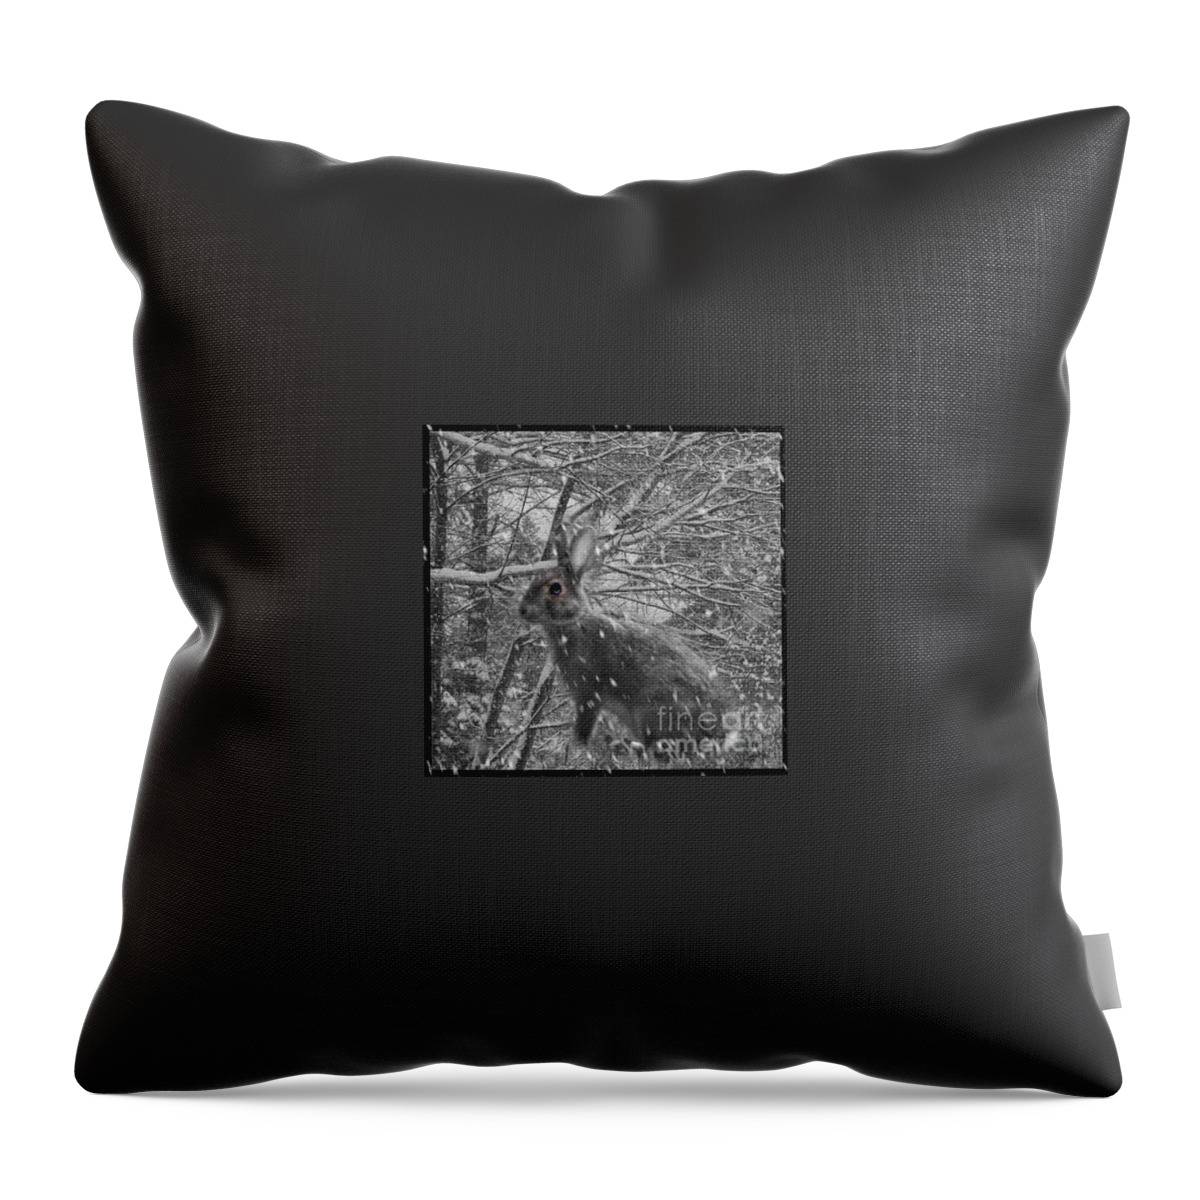 Black And White Throw Pillow featuring the photograph Life Can Get Complicated by Barbara S Nickerson